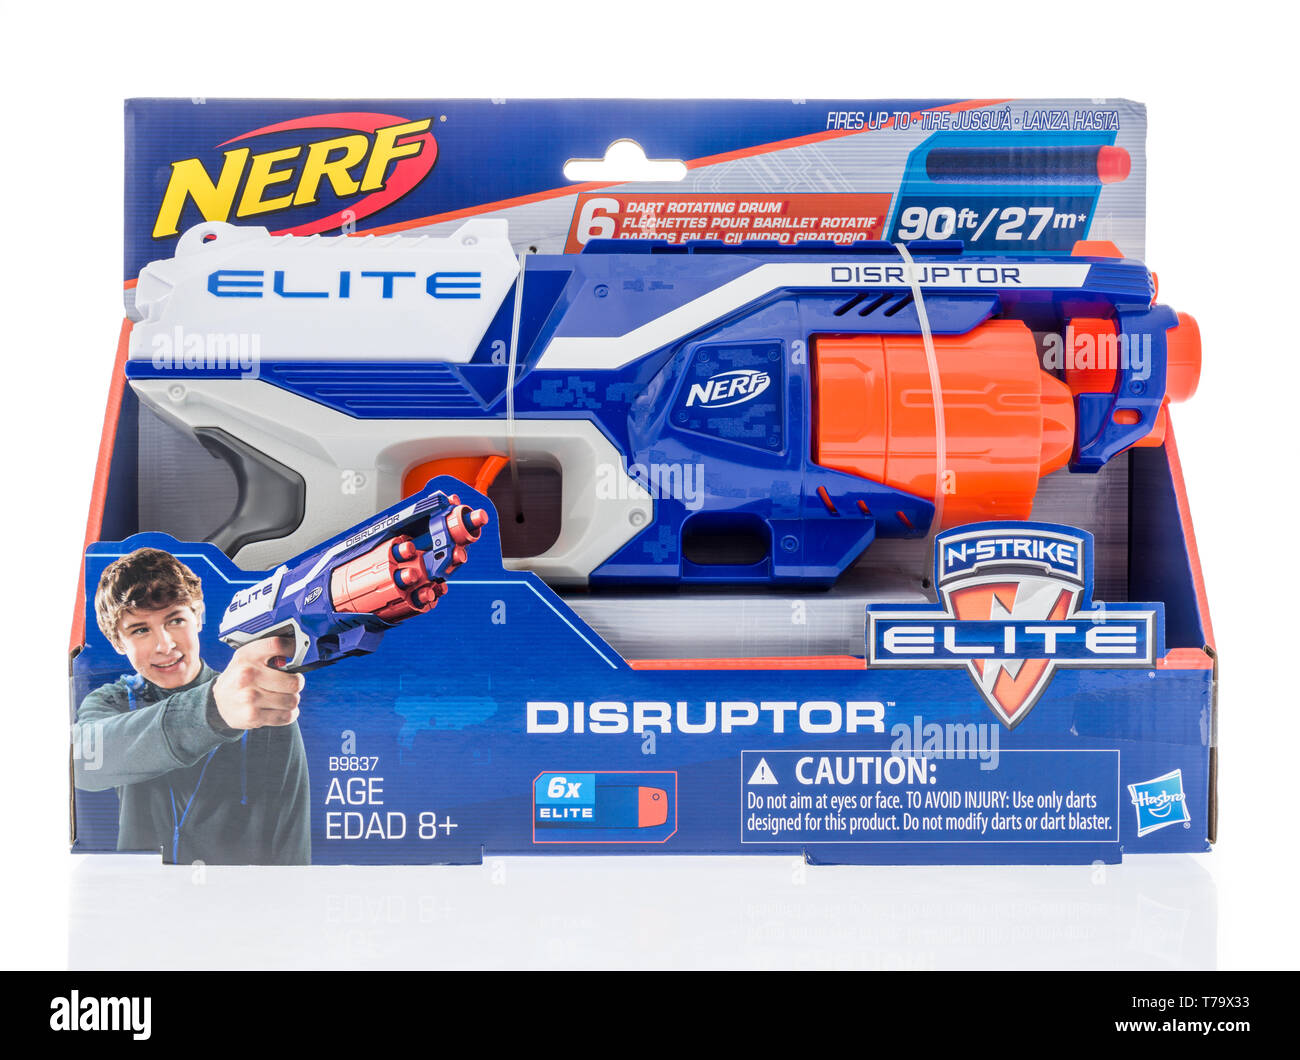 Nerf Gun High Resolution Stock Photography and Images - Alamy